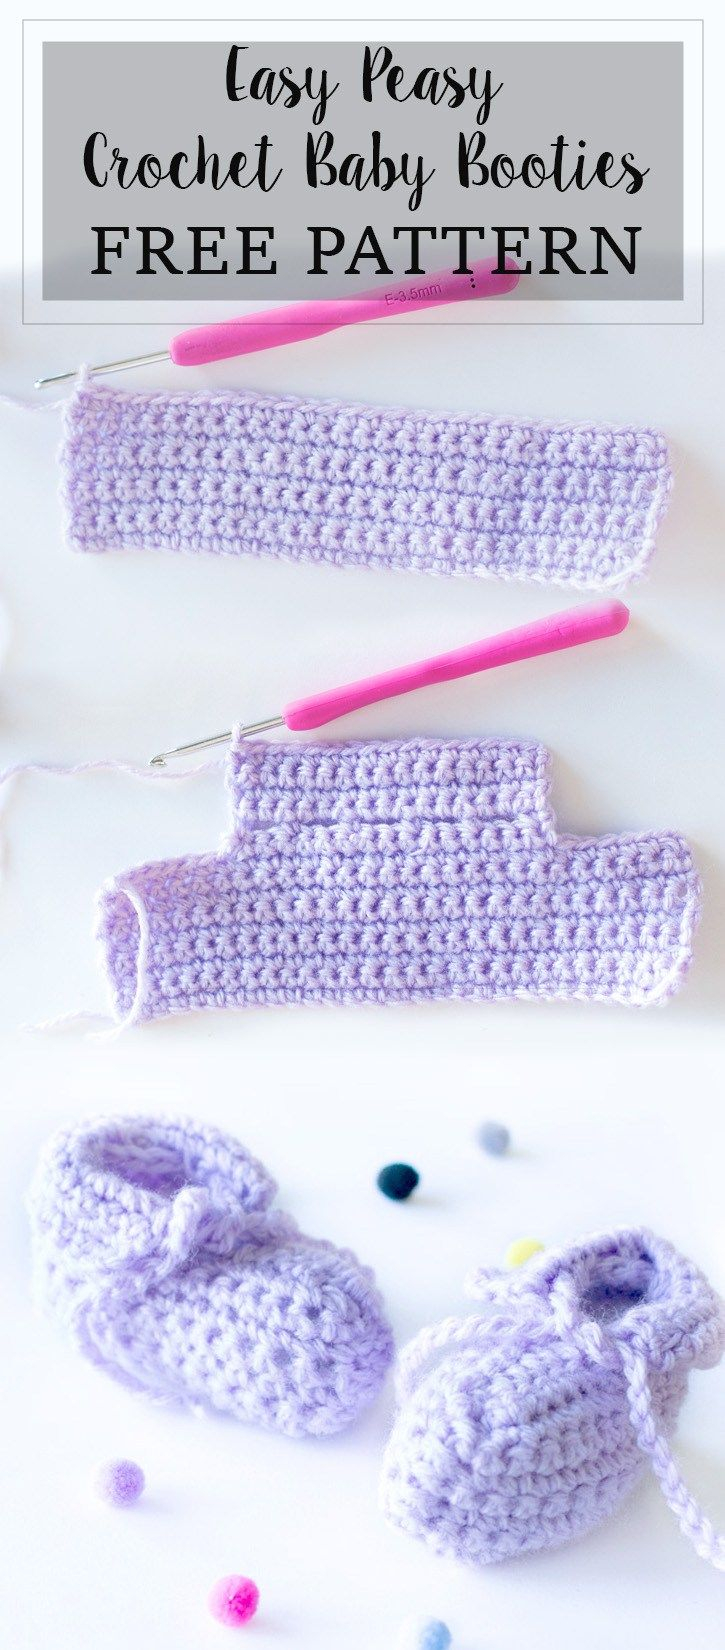 Crochet Pattern For Baby Booties Easy Crochet Ba Booties Free Pattern And Tutorial